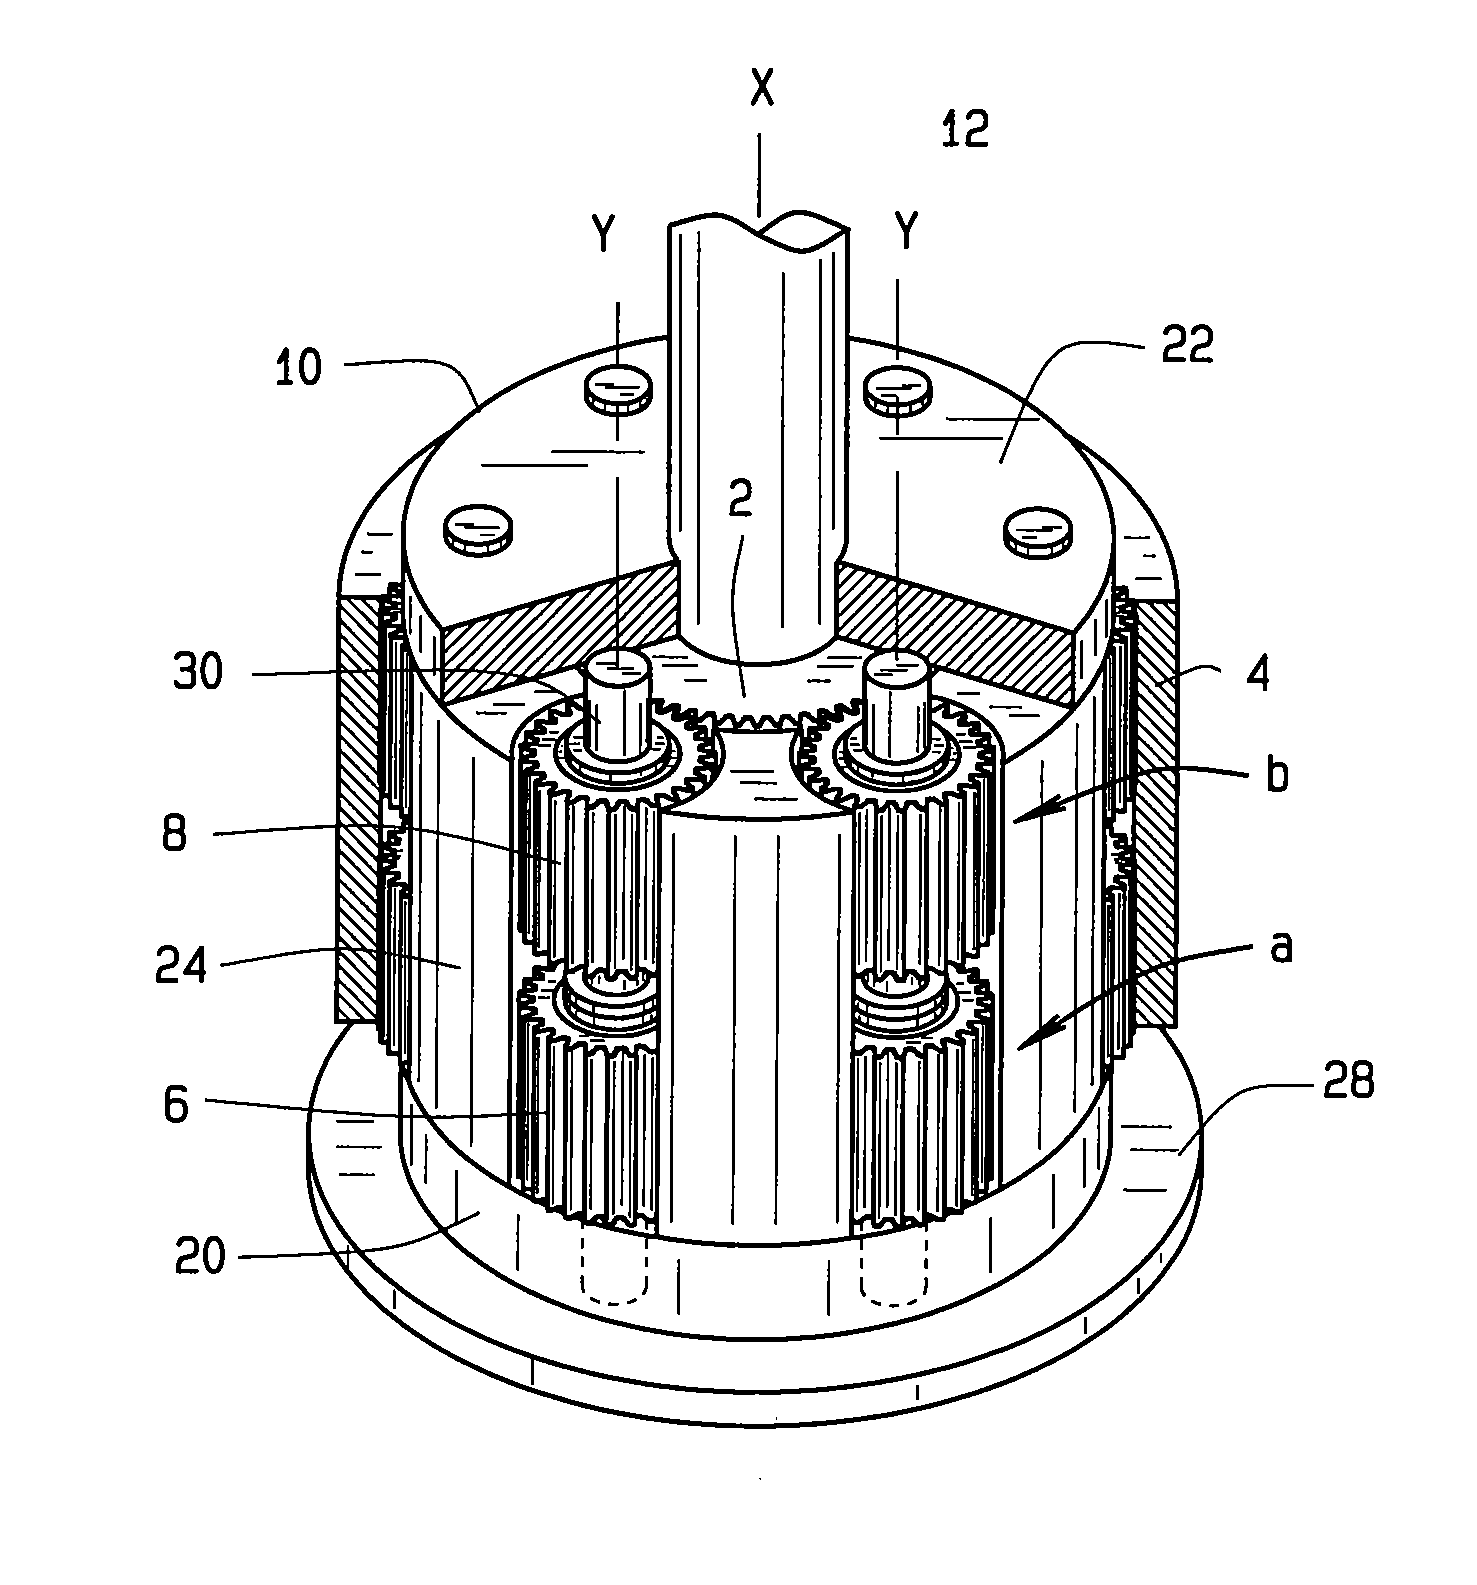 Epicyclic Gear System Having Two Arrays Of Pinions Mounted On Flexpins With Compensation For Carrier Distortion